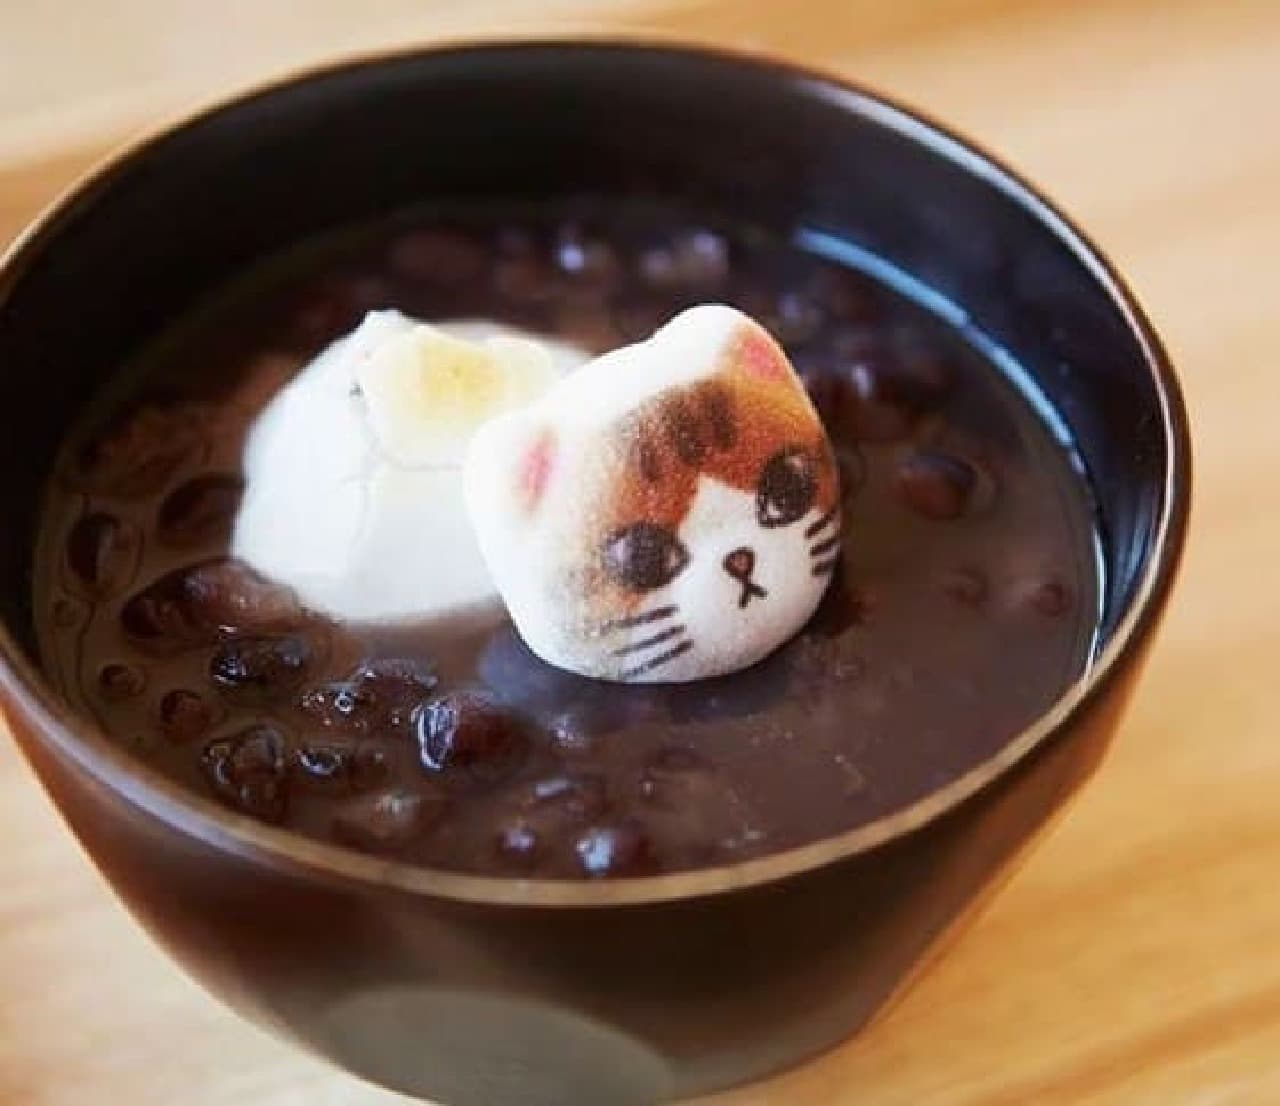 In the middle of [Cat Hozui] in the bowl